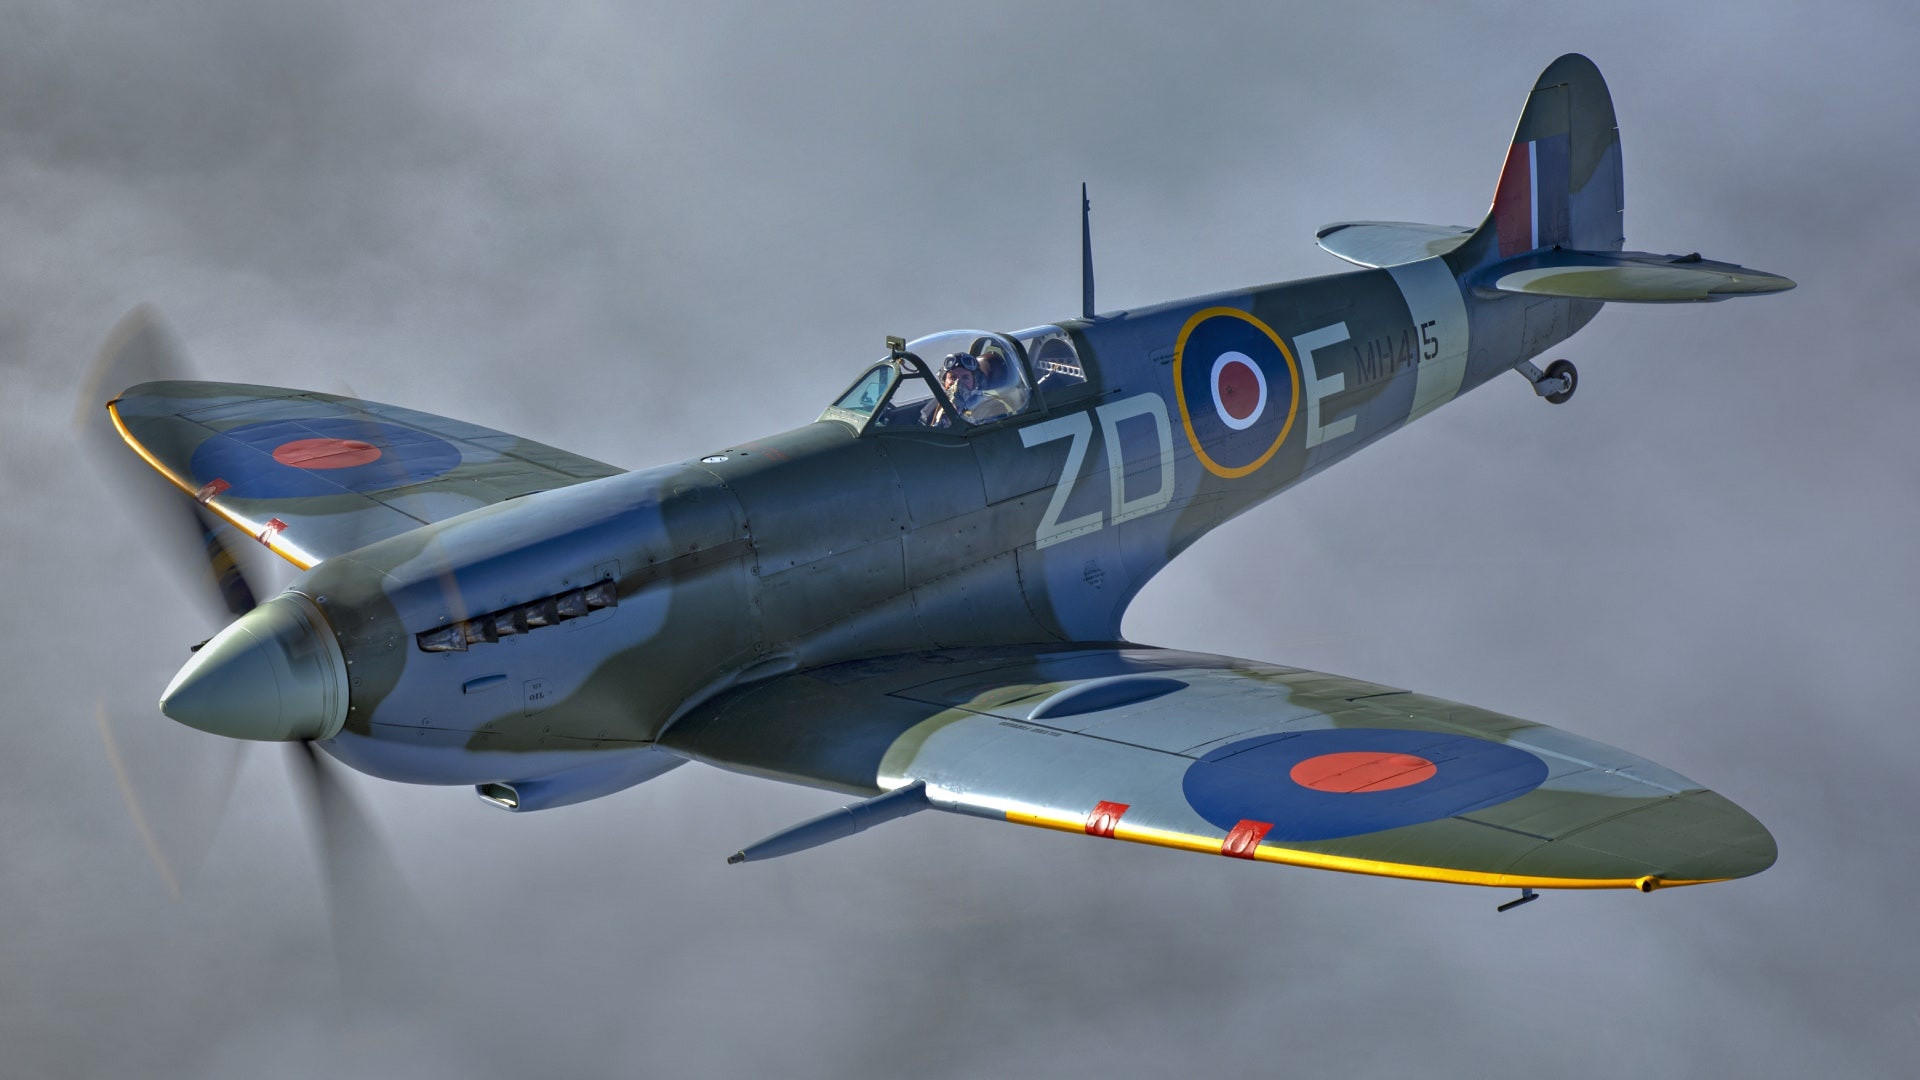 Vintage Spitfire, Record-breaking price, Historic aircraft, Collectible gem, 1920x1080 Full HD Desktop